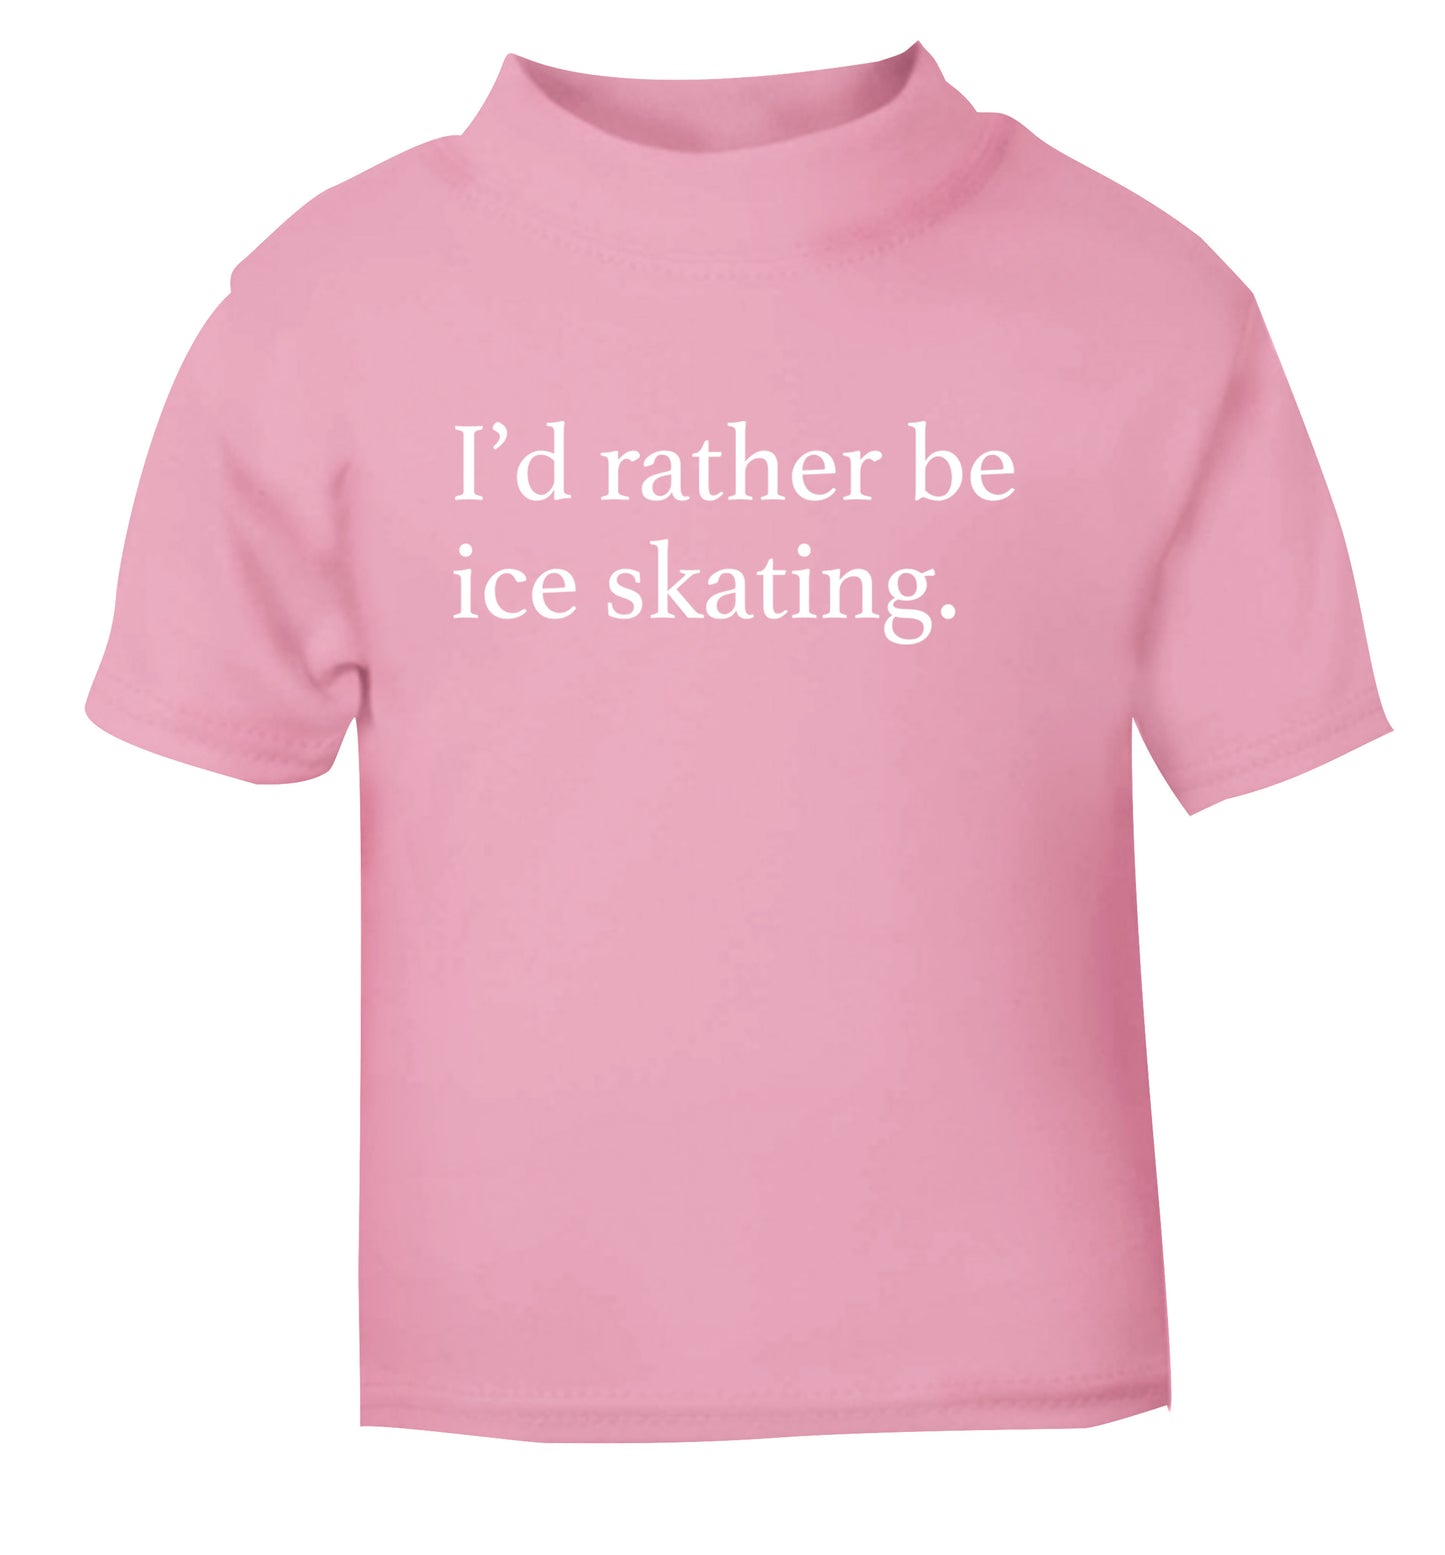 I'd rather be ice skating light pink Baby Toddler Tshirt 2 Years